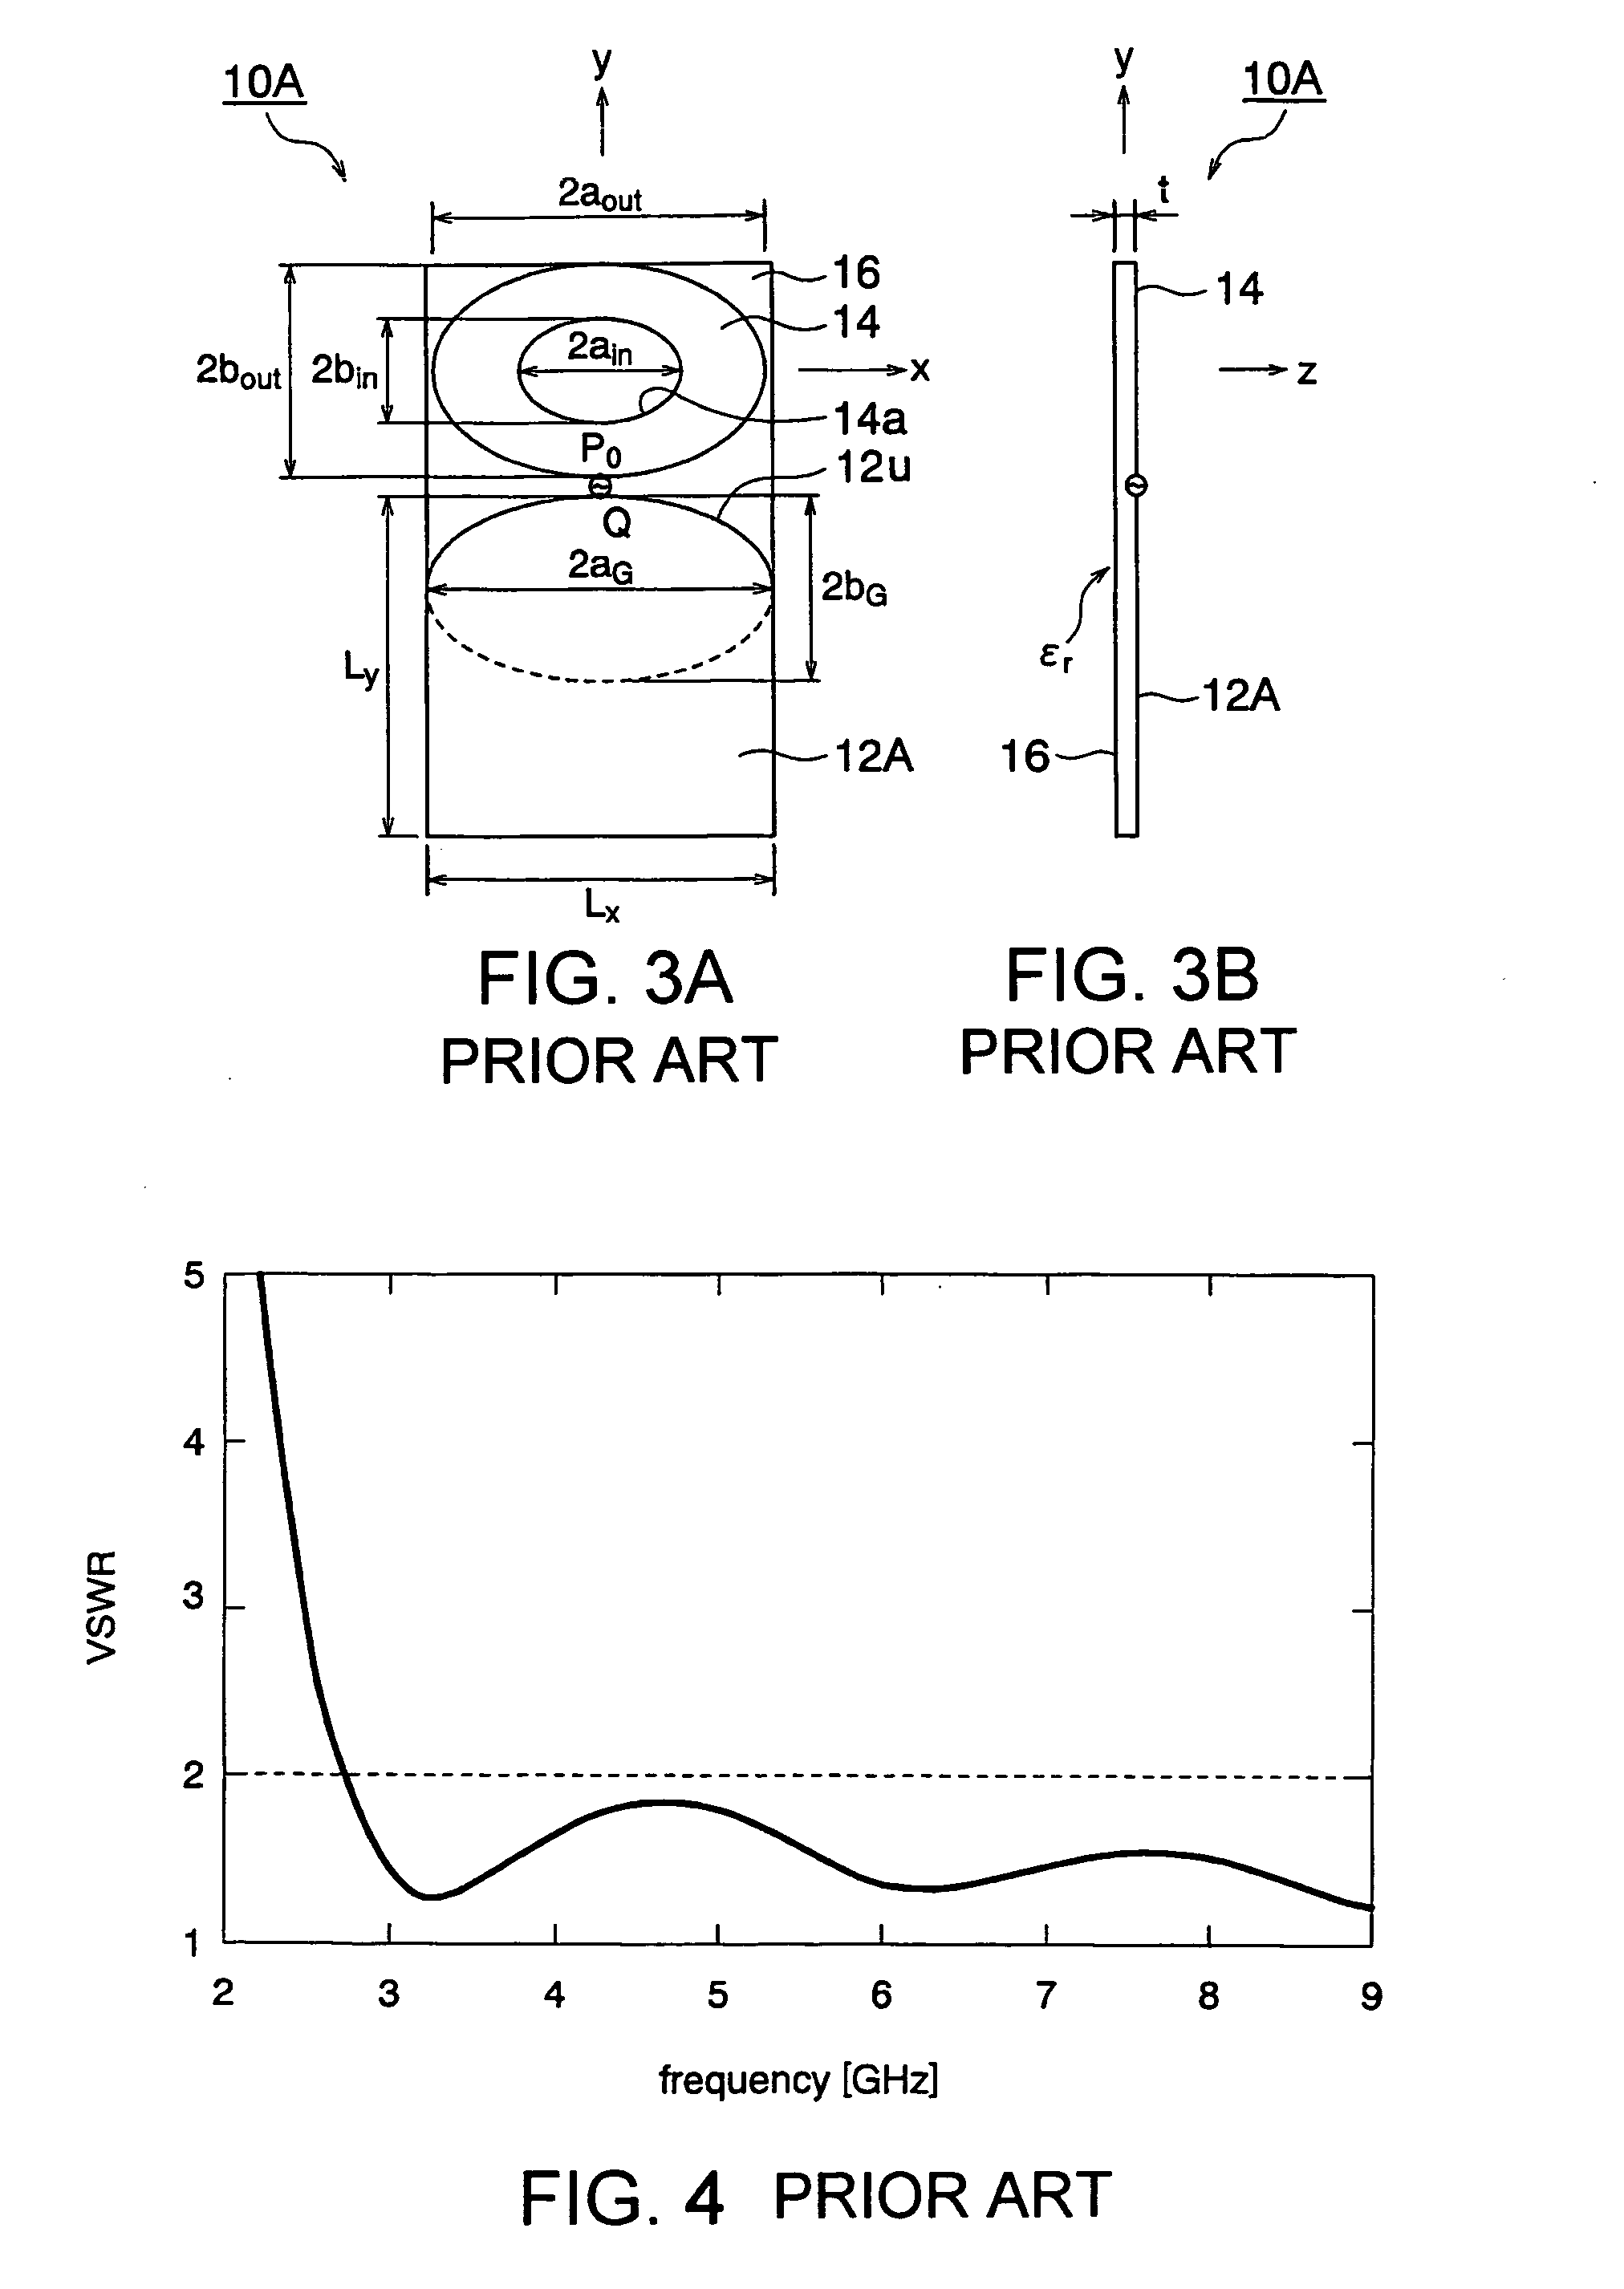 Broadband antenna unit comprising a ground plate having a lower portion where both side corner portions are deleted